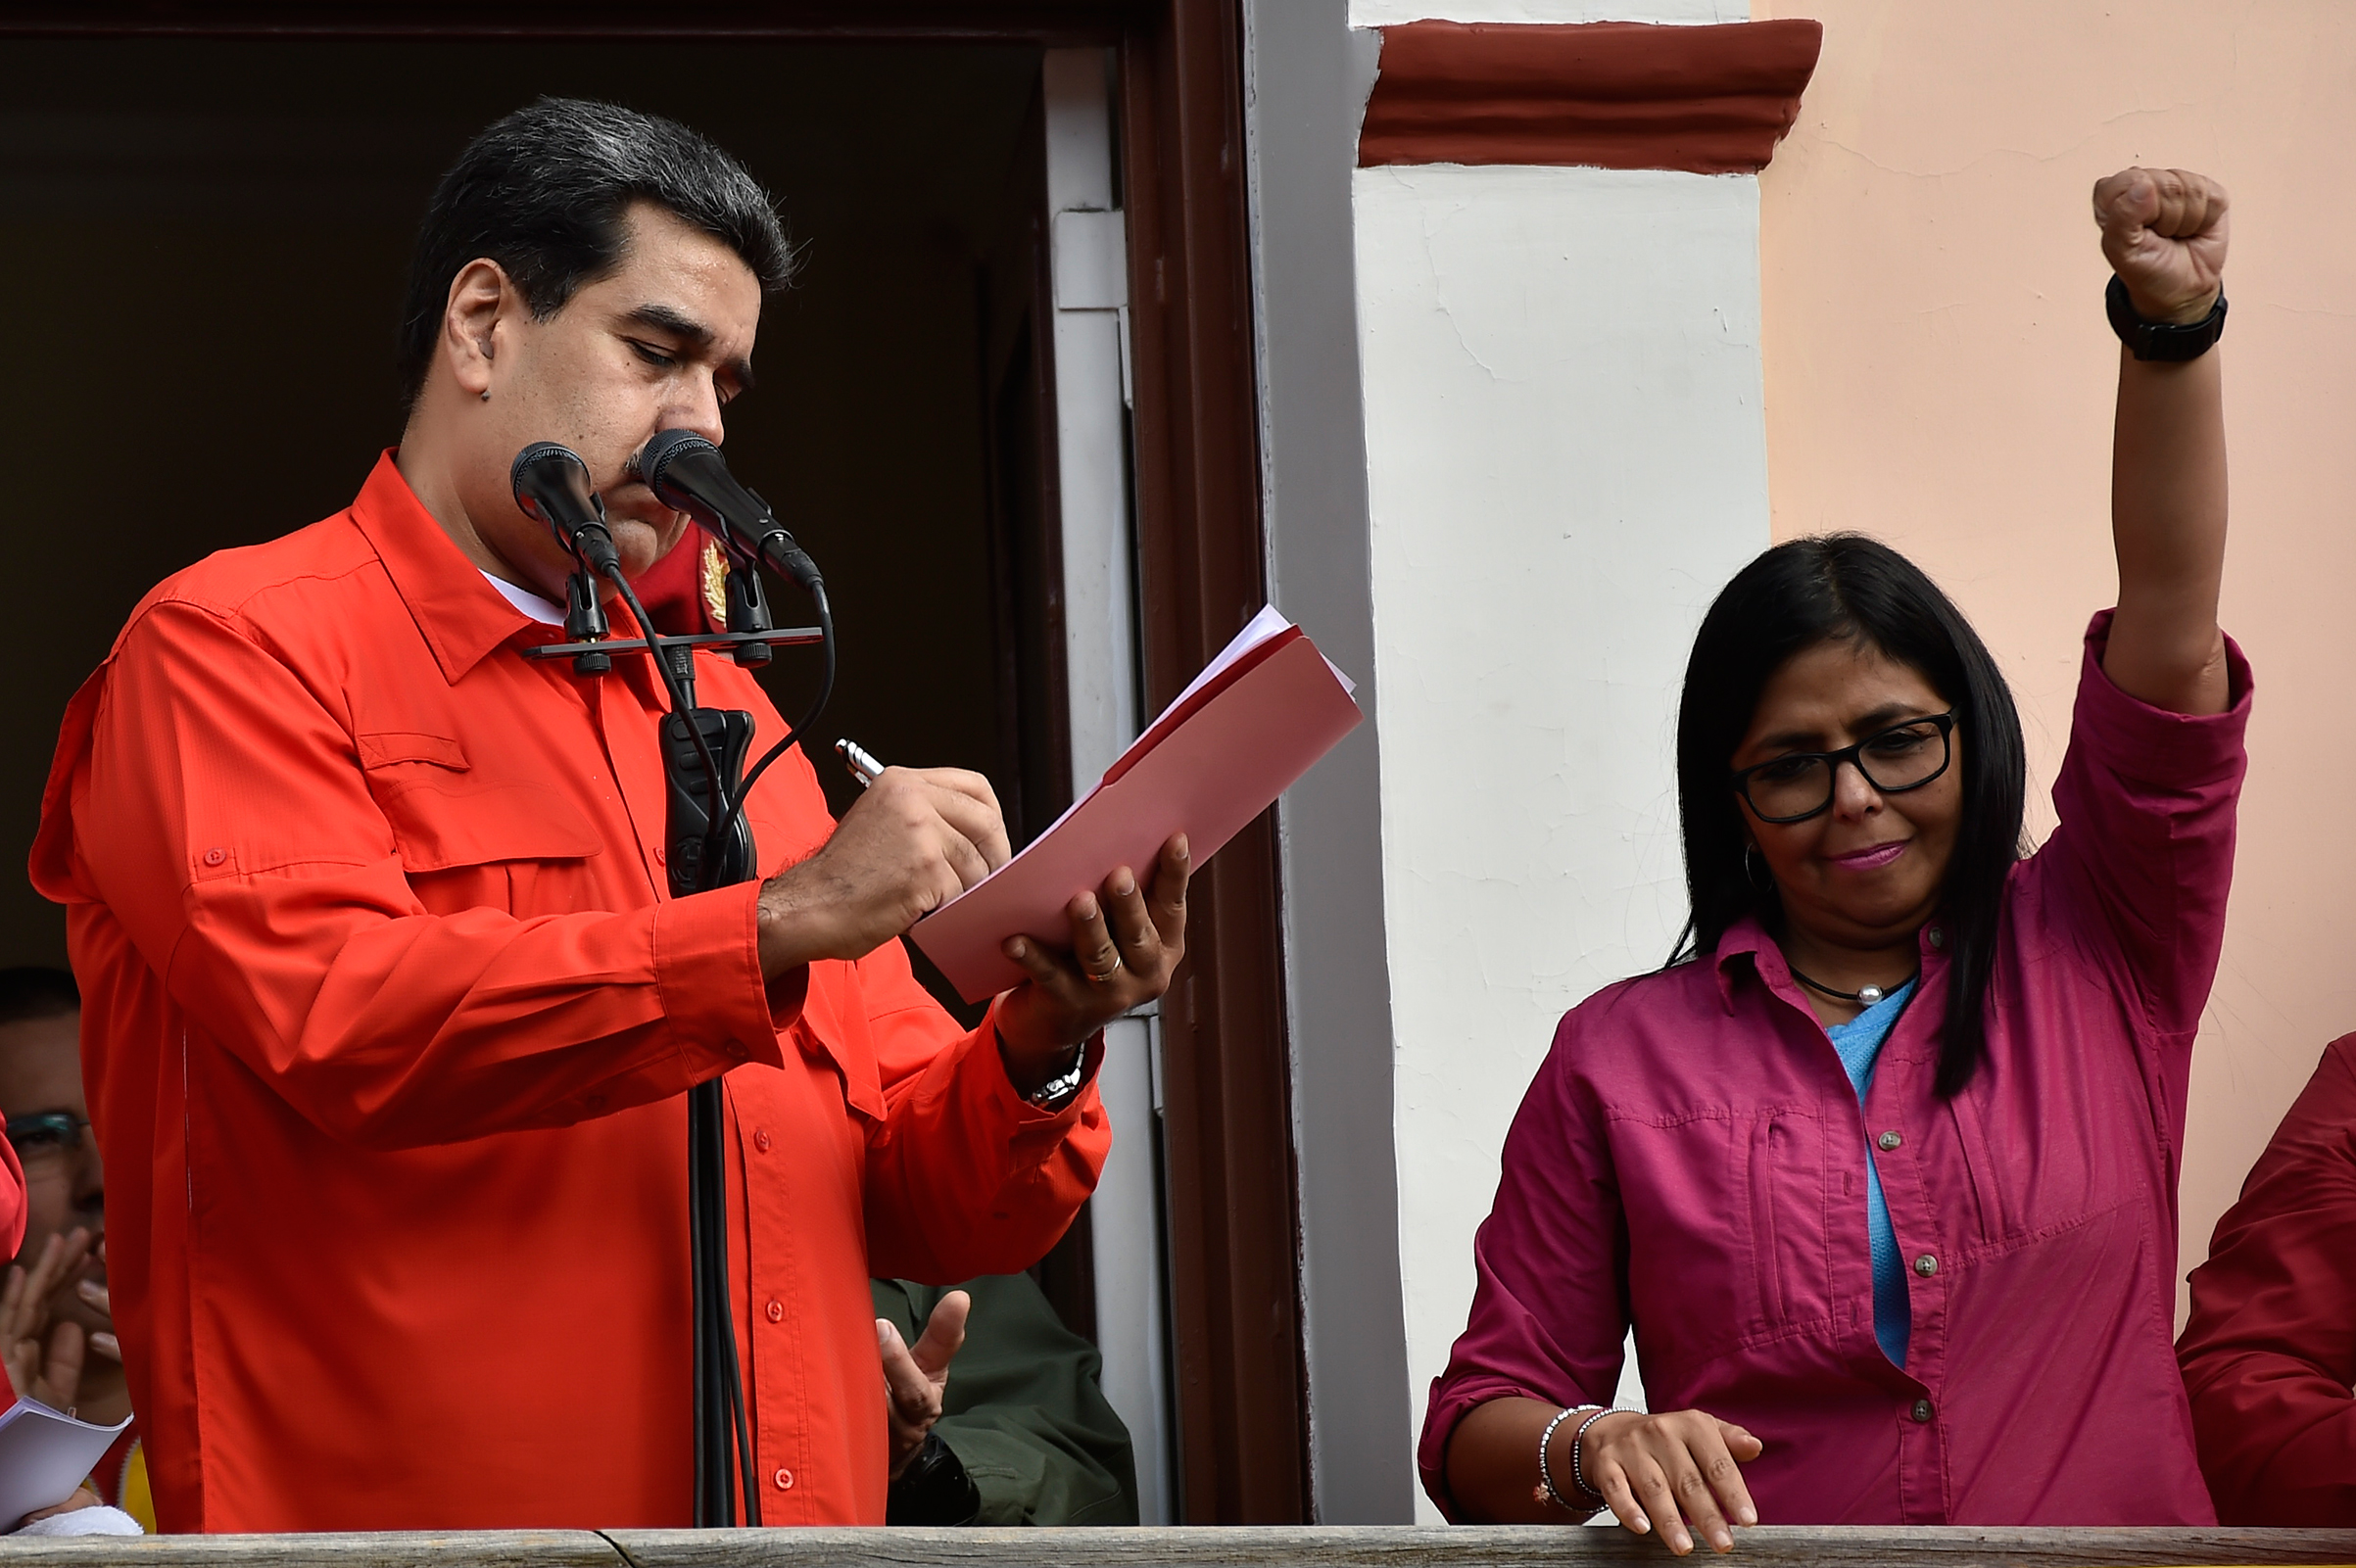 Venezuela's President Nicolás Maduro, next to Vice President Delcy Rodríguez, signs a document breaking off diplomatic ties with the U.S. at a balcony at the Miraflores Presidential Palace in Caracas on Jan. 23, 2019. (Luis Robayo—AFP/Getty Images)